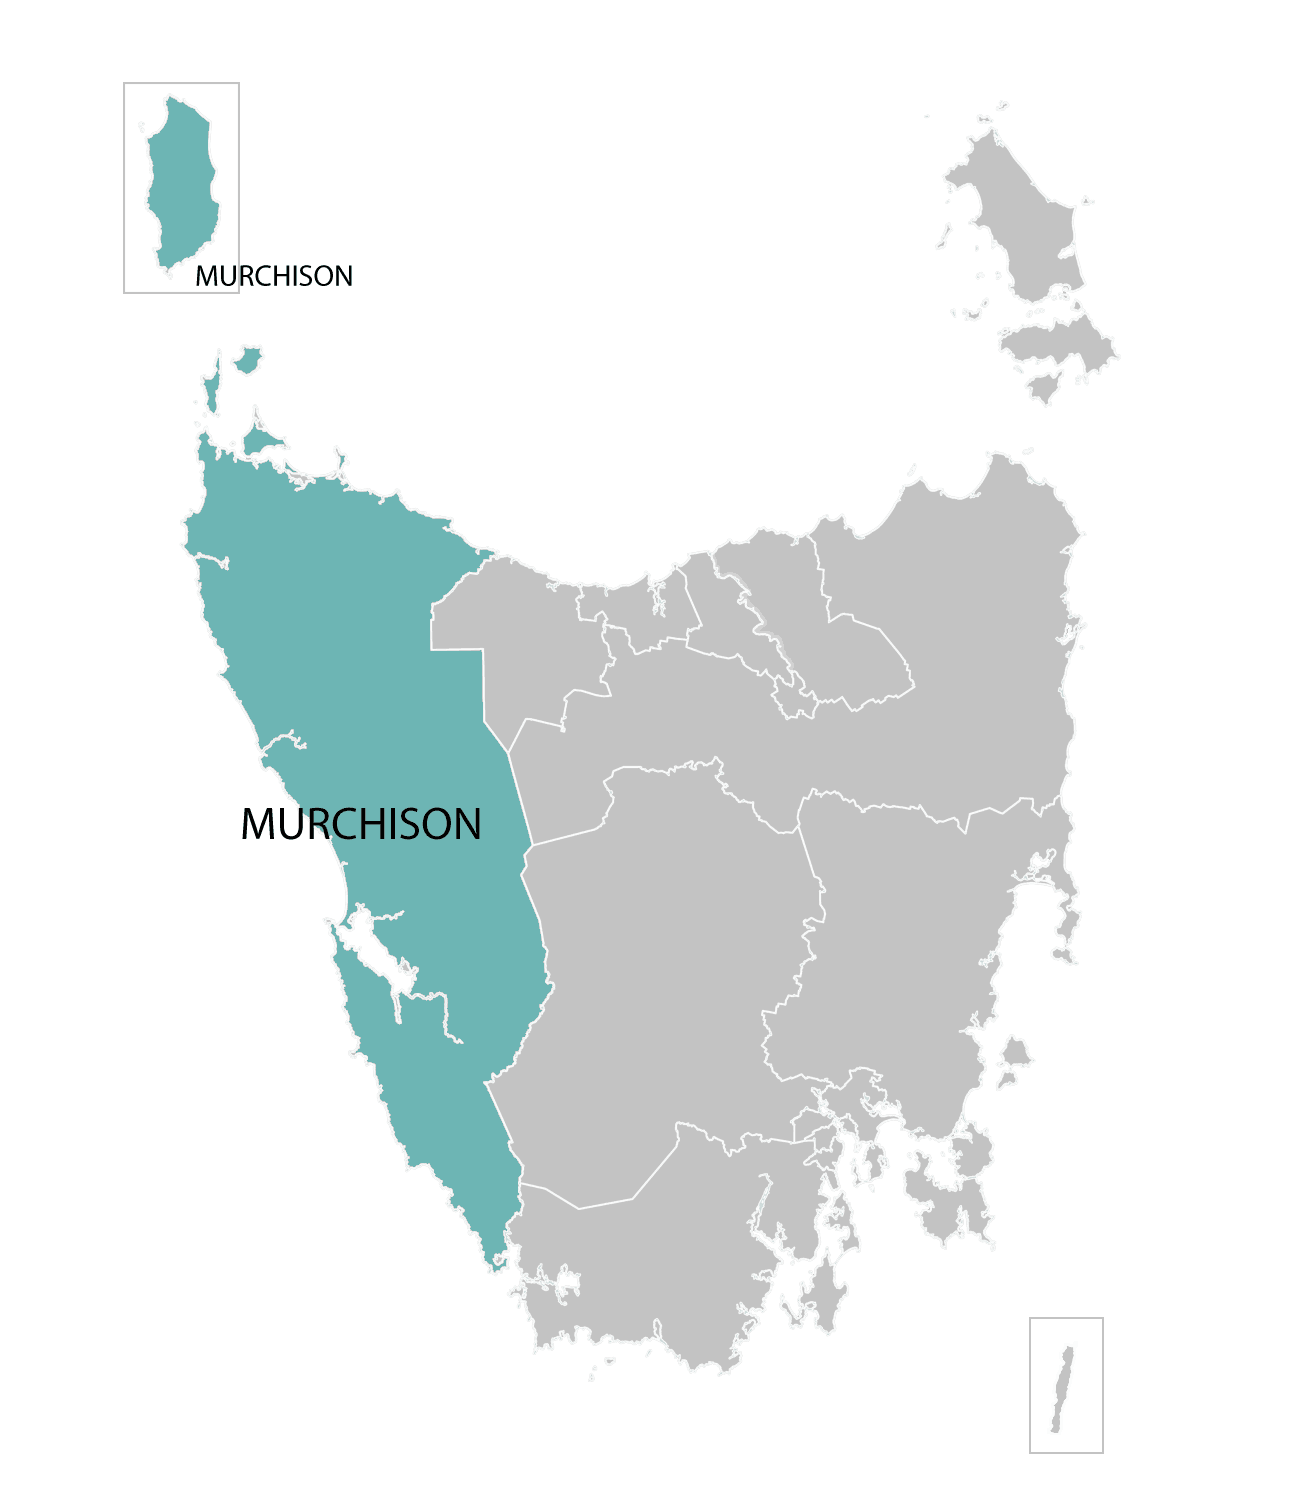 Preview of map of Murchison division